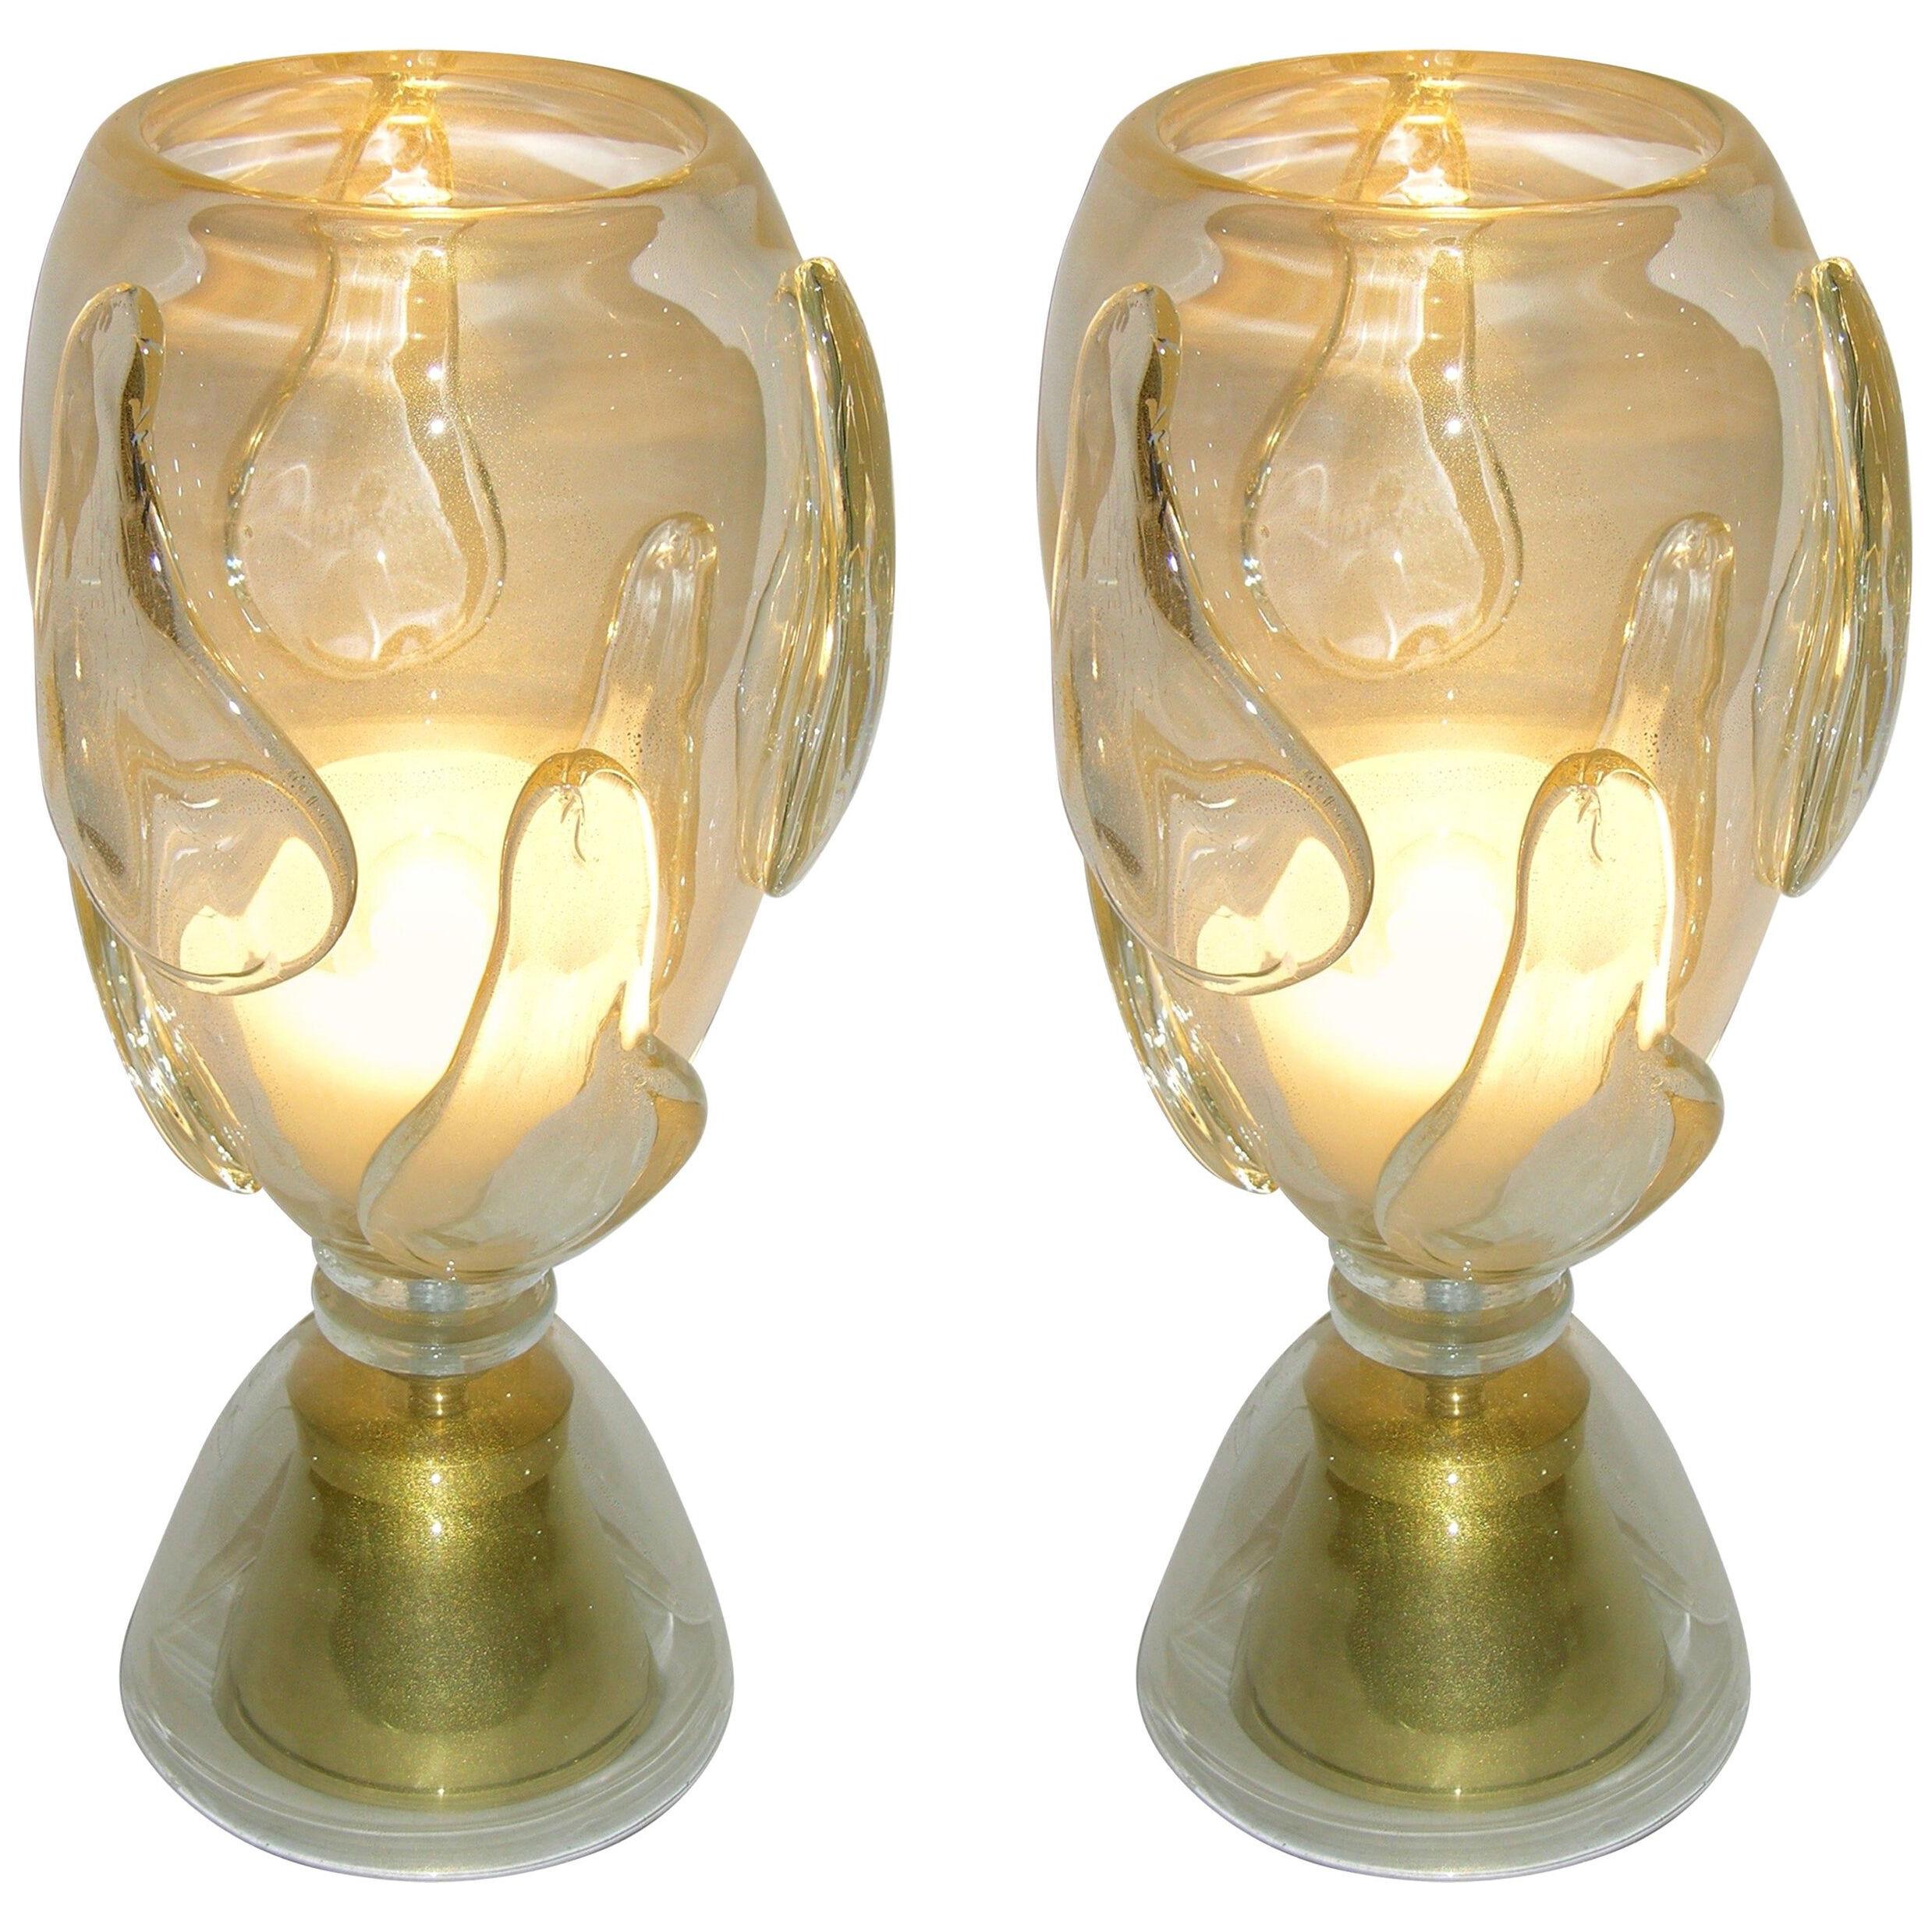 Constantini 1980s Italian Pair of Modern Brass and Gold Murano Glass Lamps